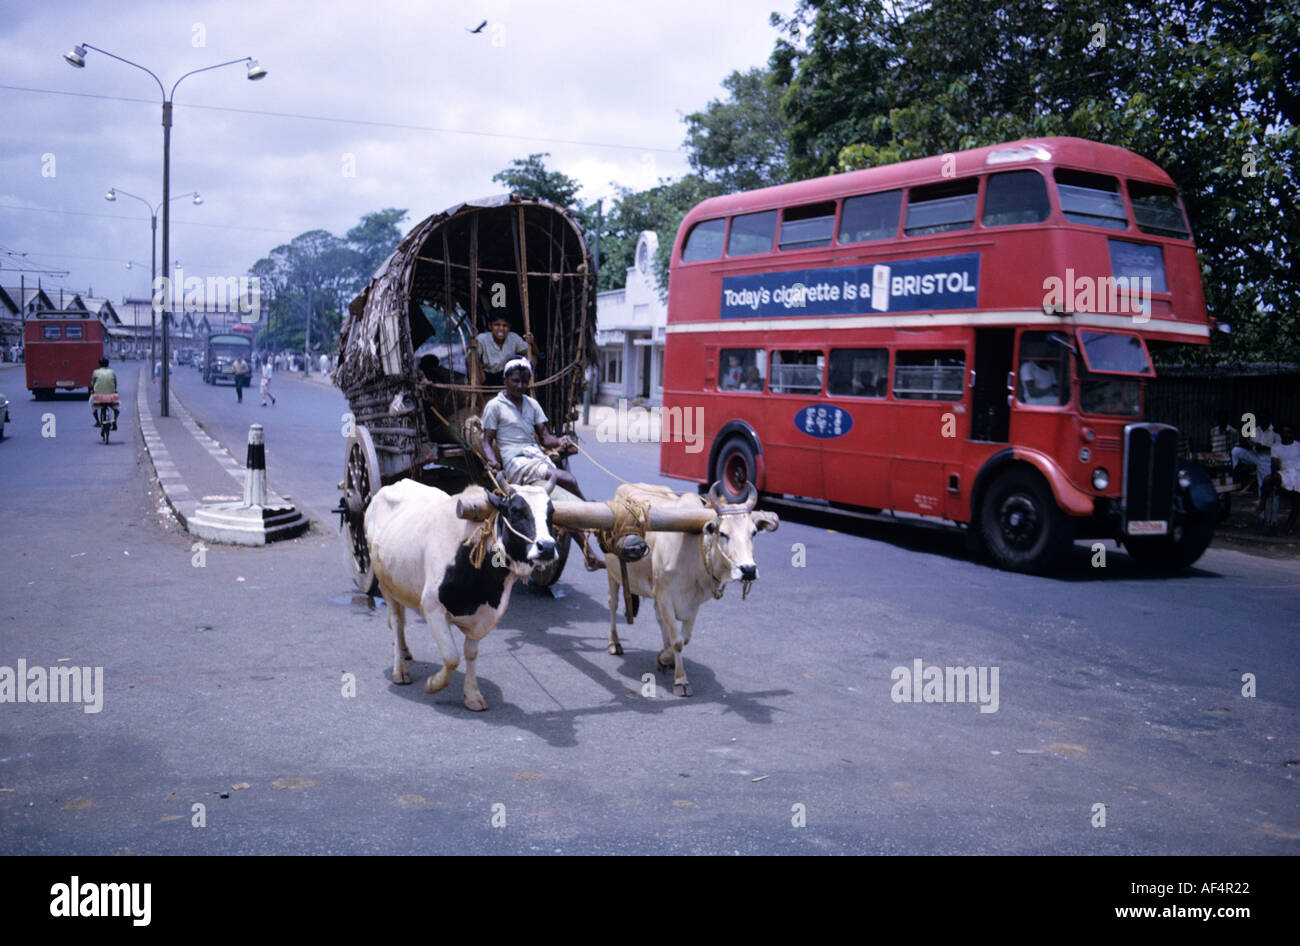 Old ox drawn cart and bright red ex London bus with Bristol cigarette advert on the side in mid 1960s in Colombo Sri Lanka Stock Photo